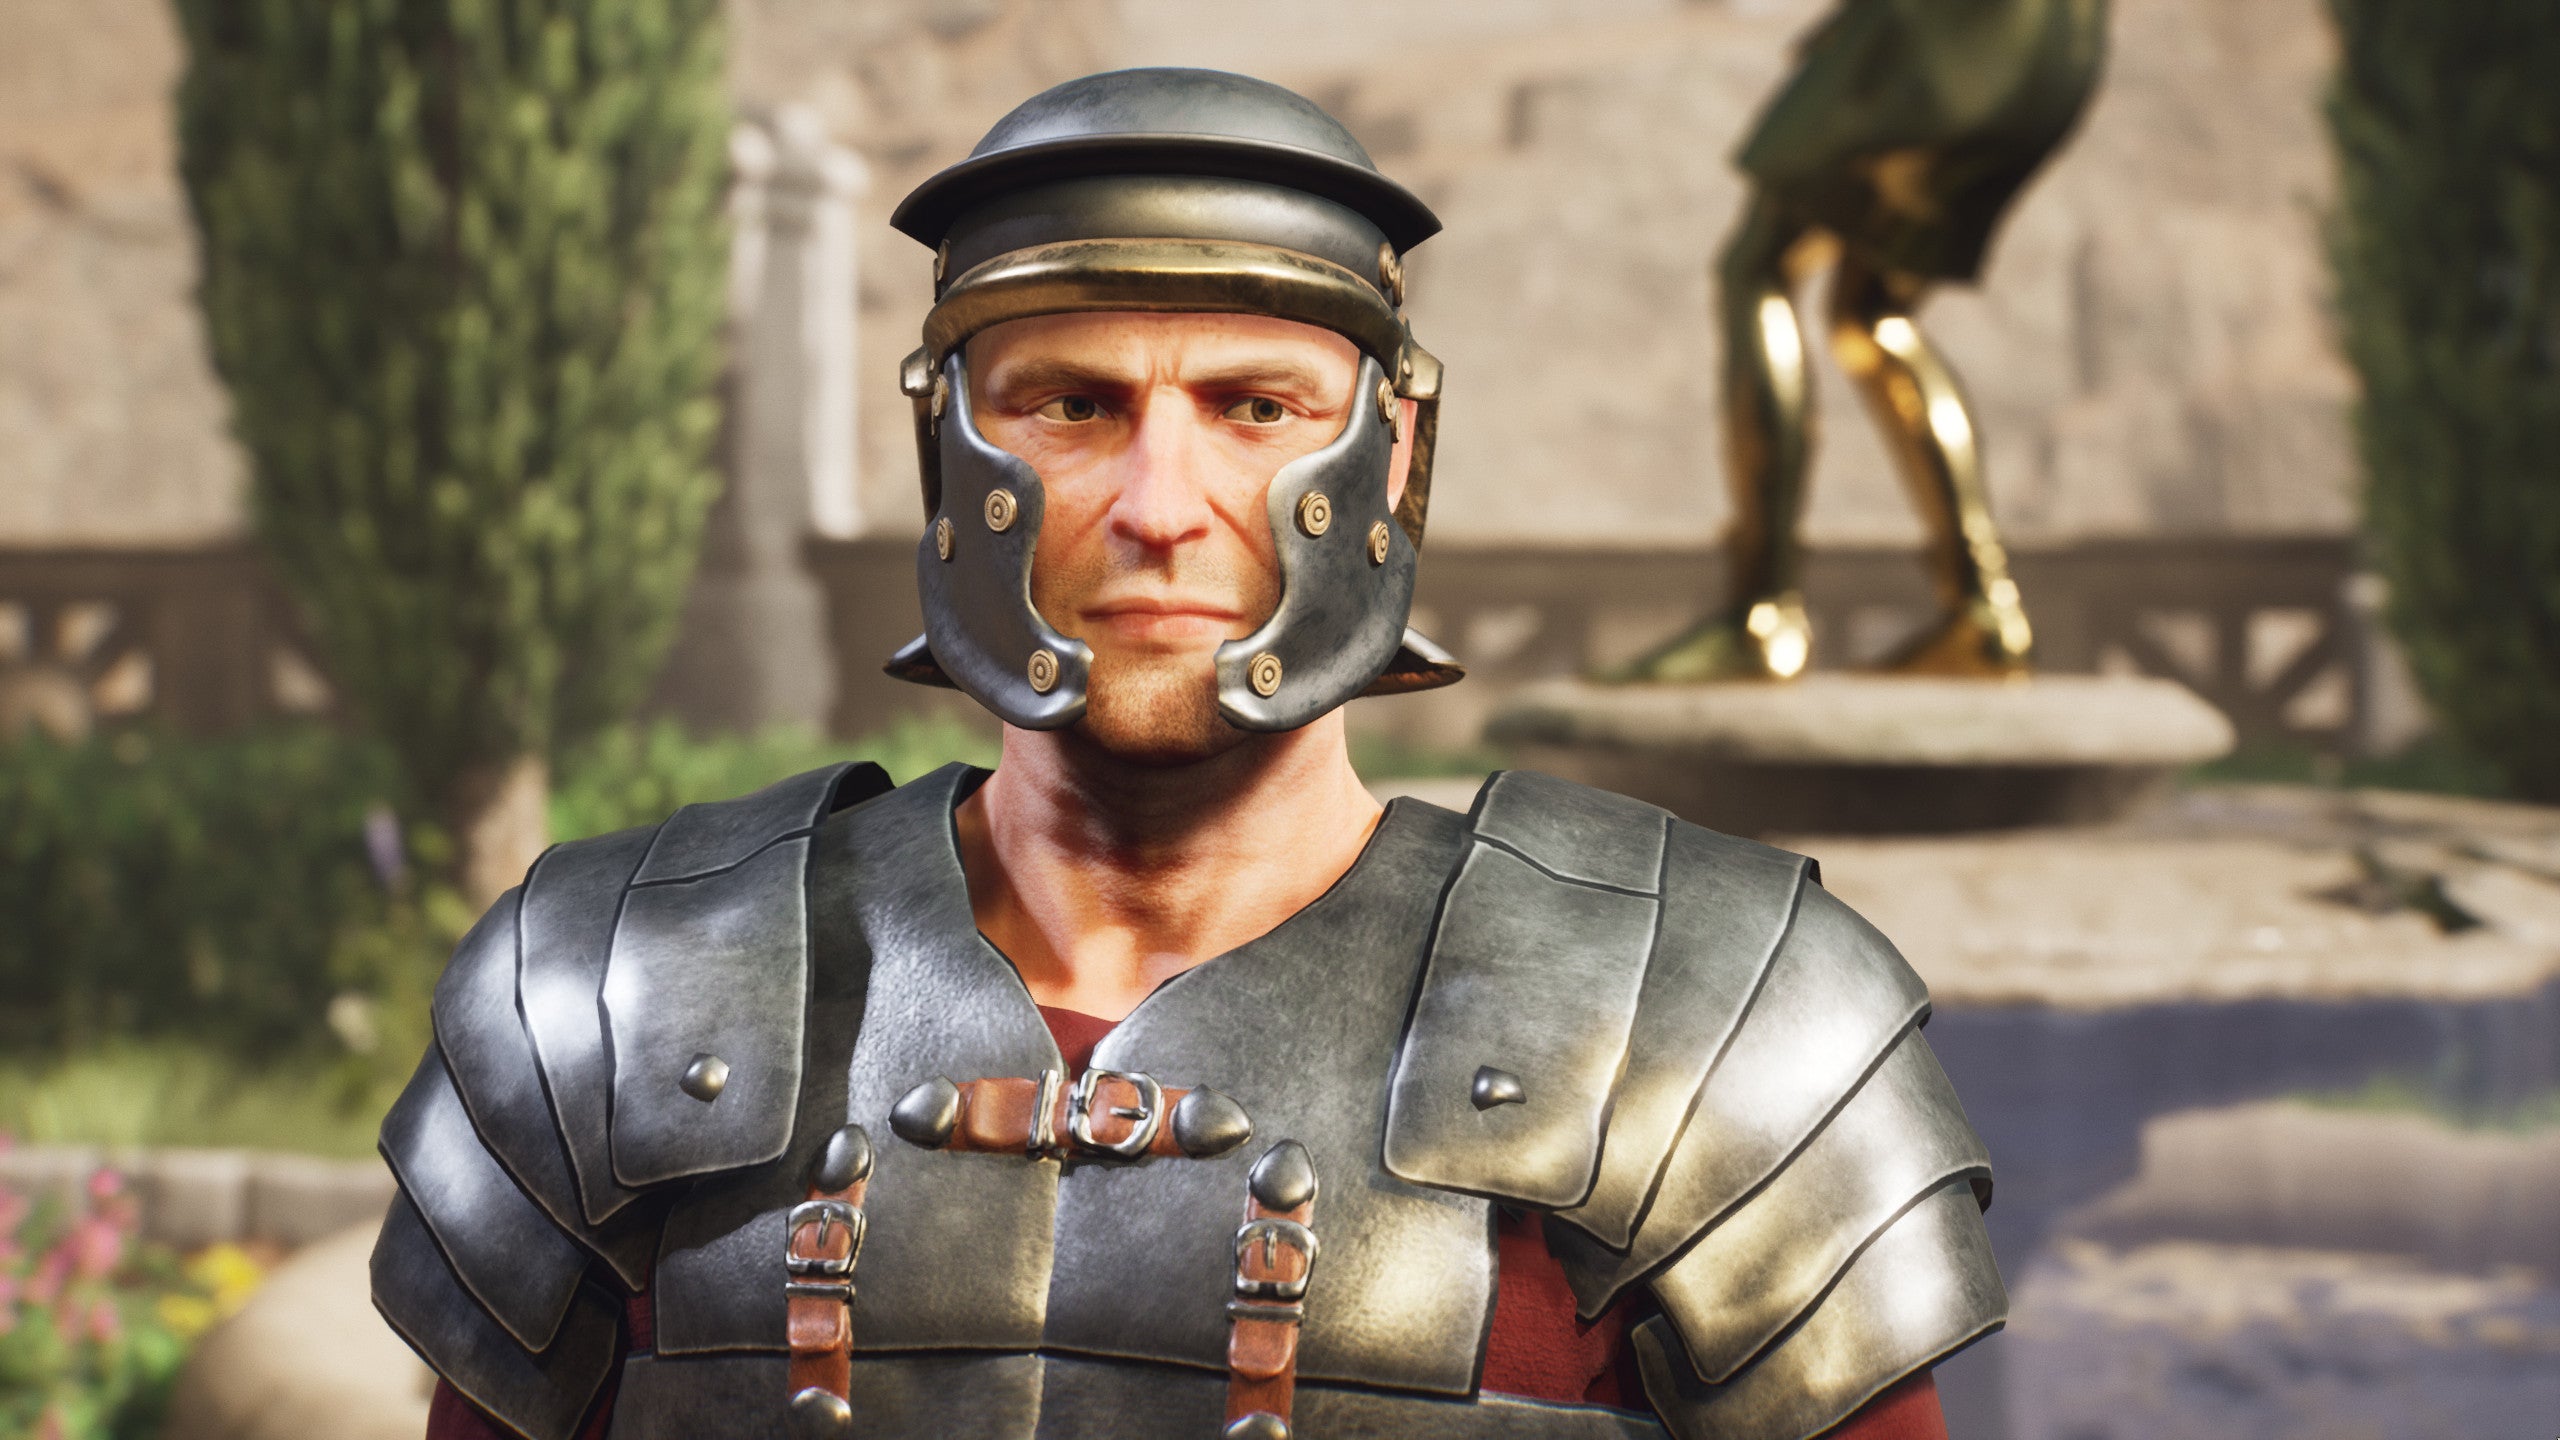 Ancient Roman soldier Horatius poses in a The Forgotten City screenshot.